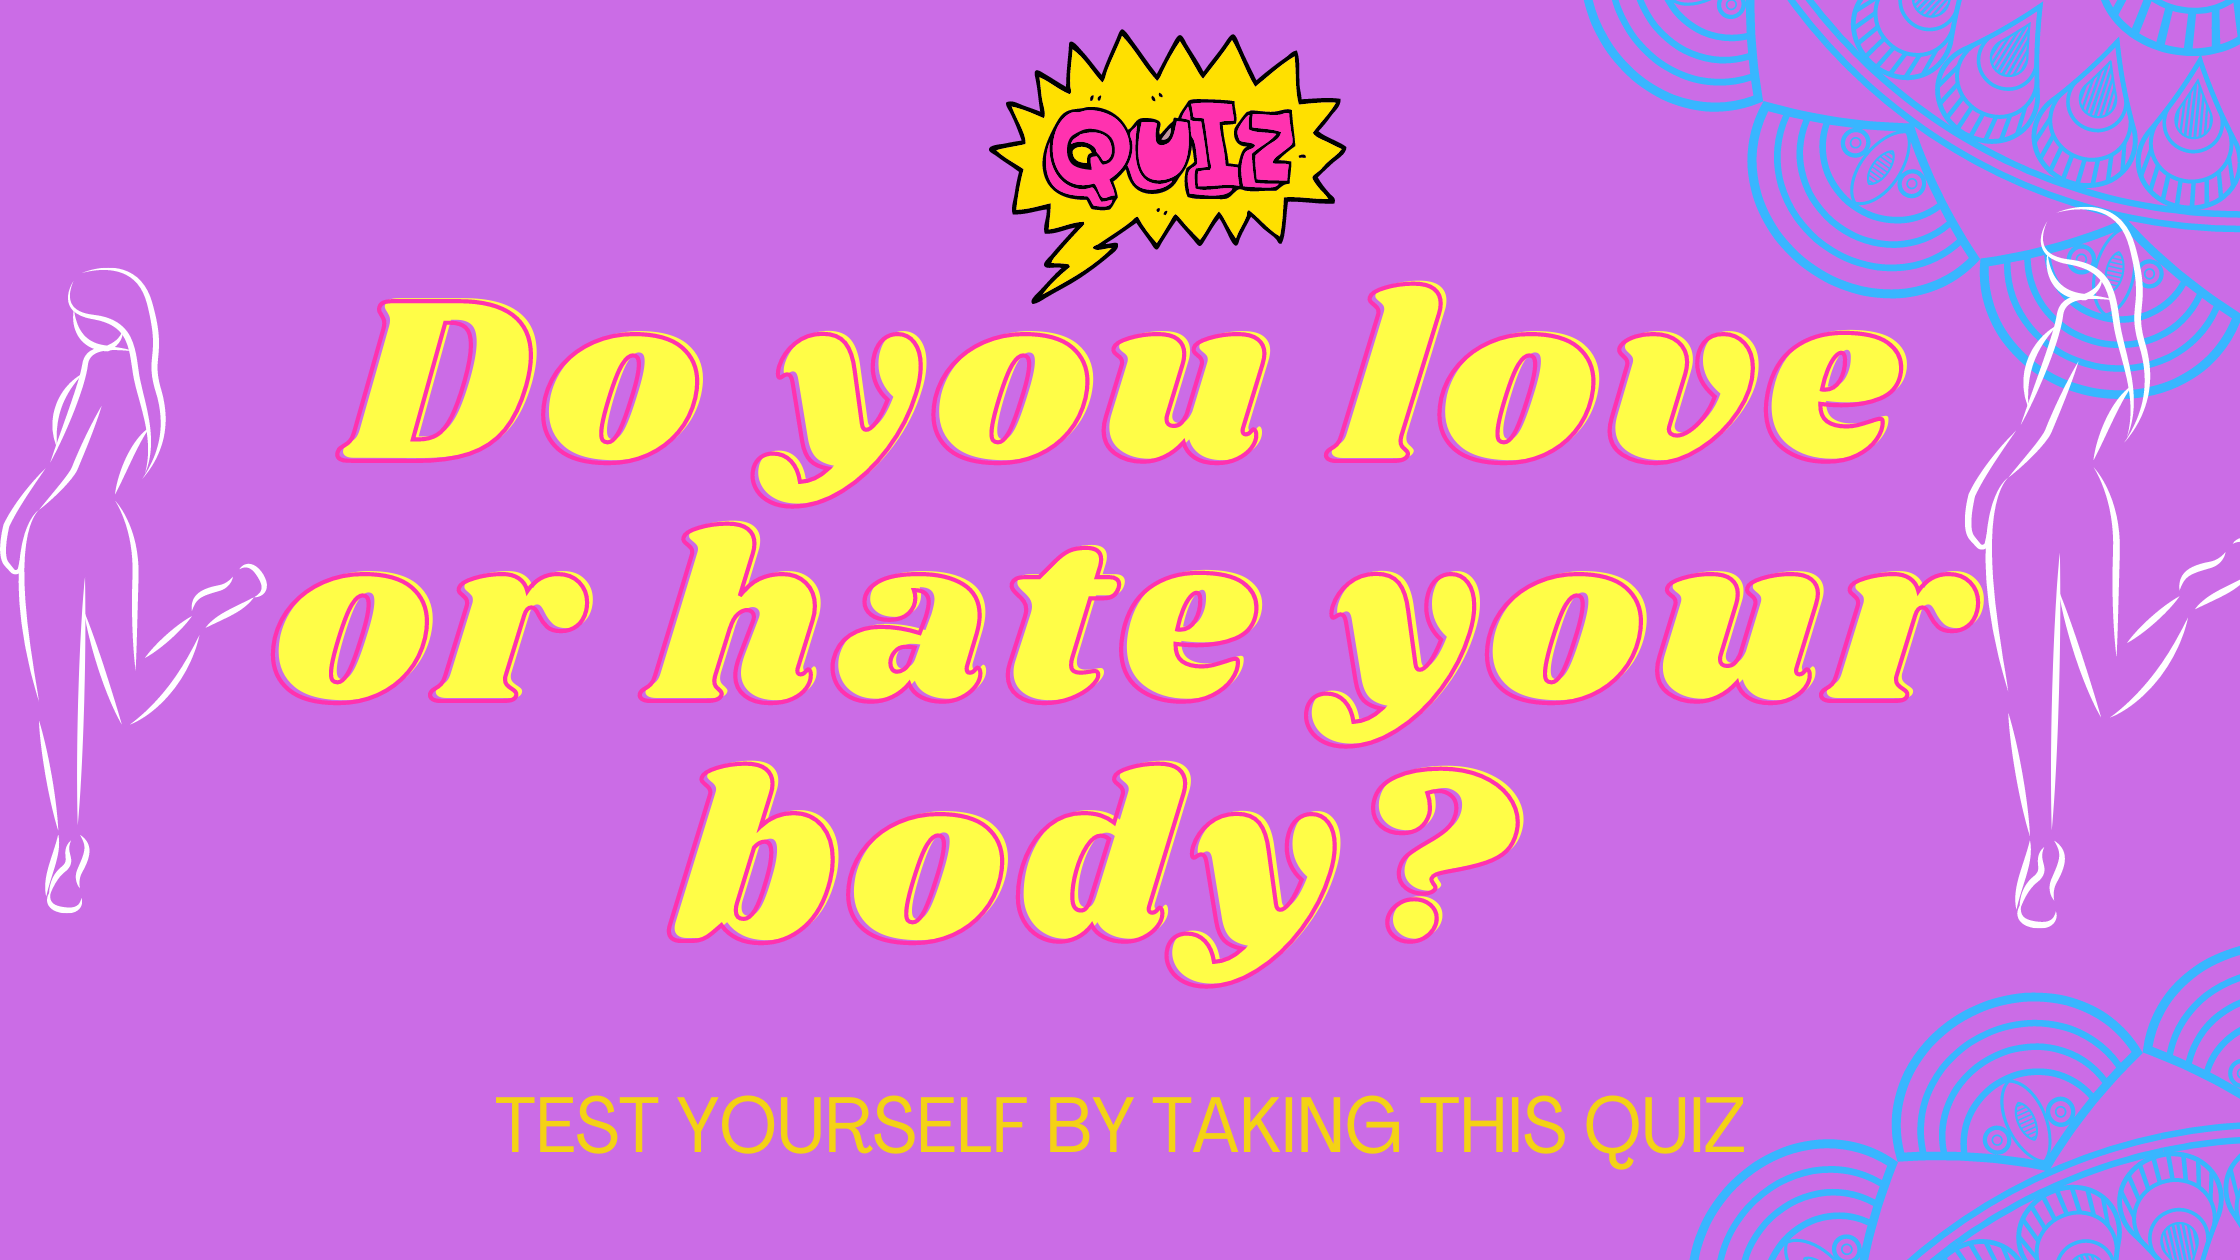 Love or hate your body